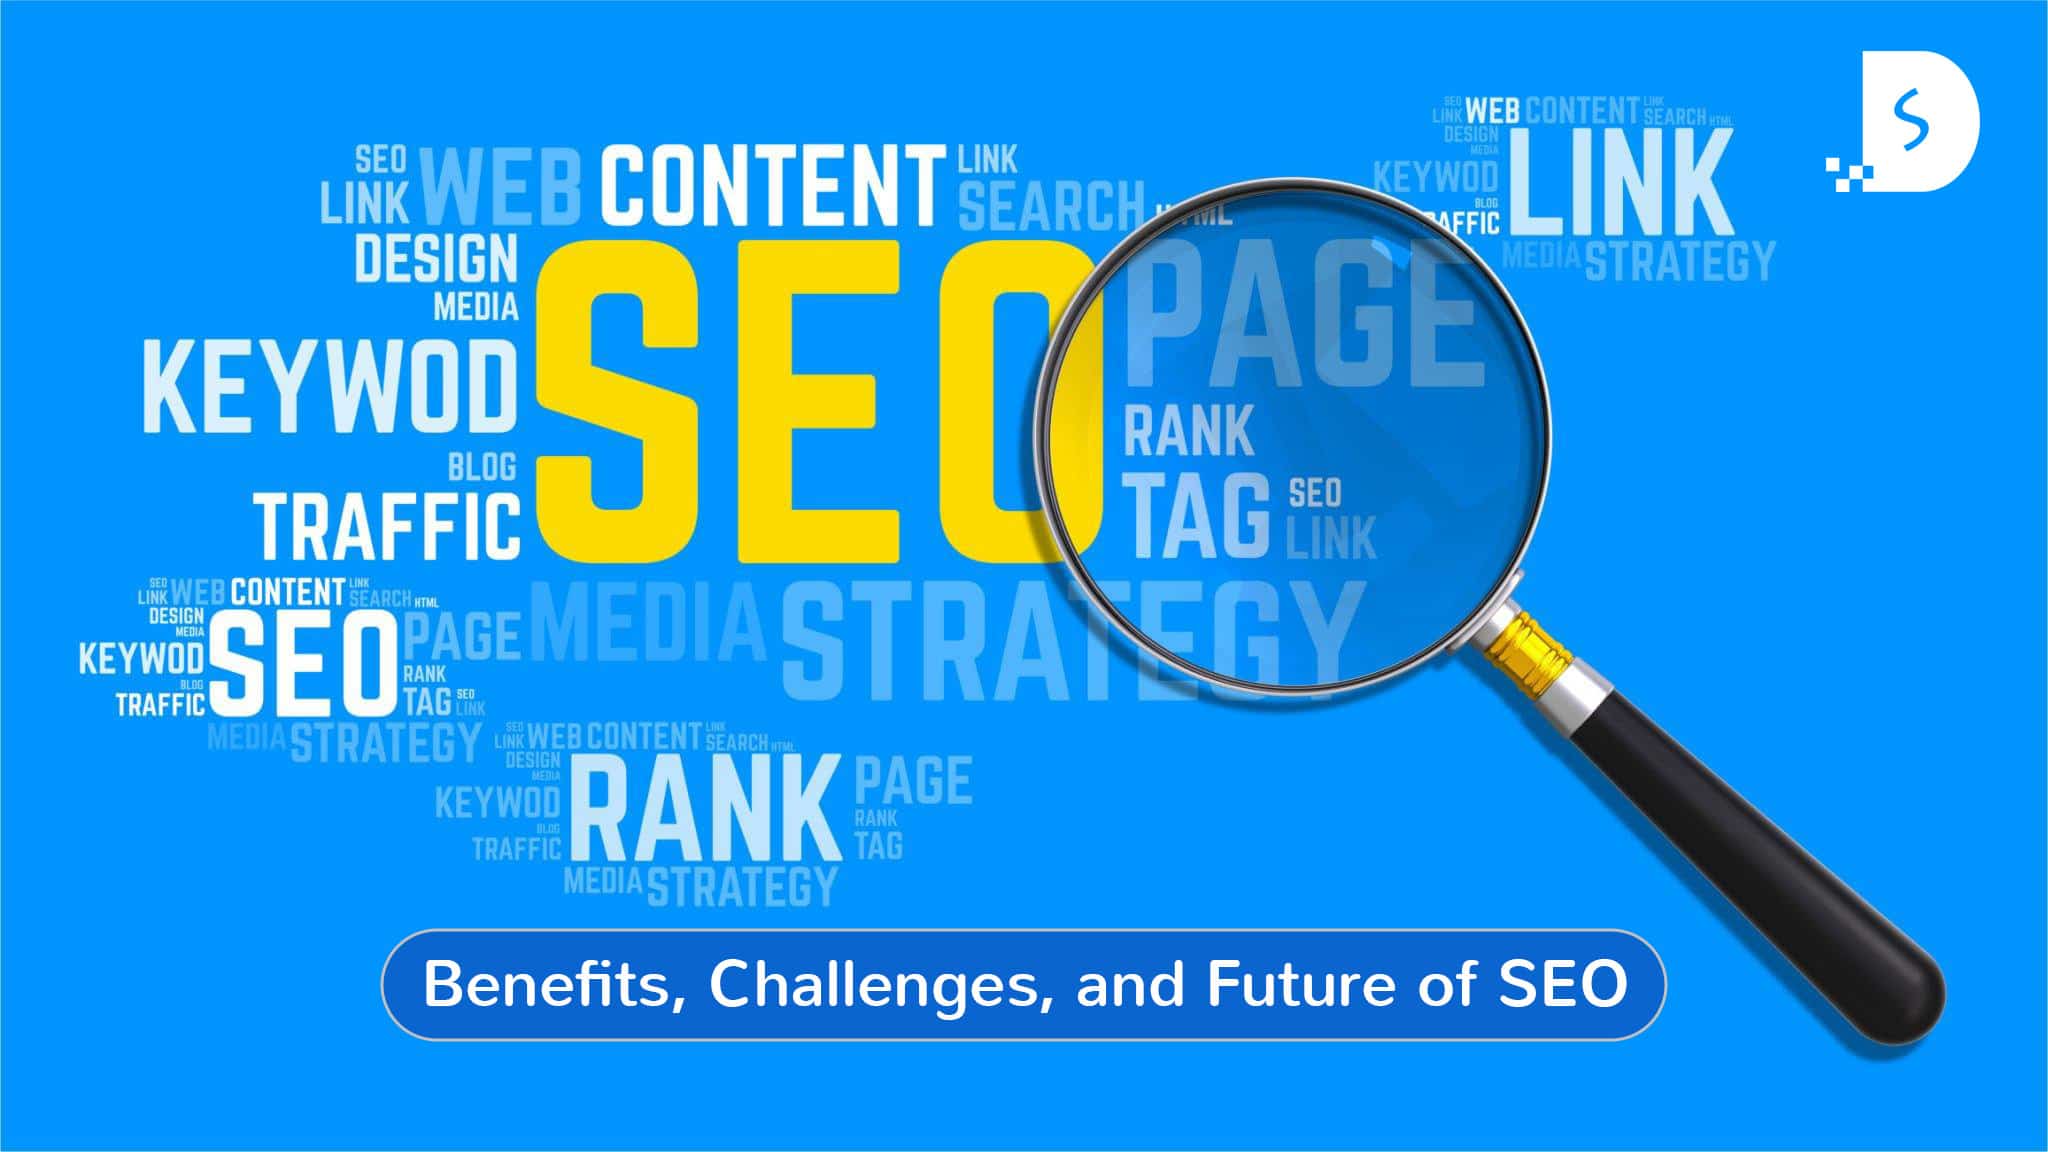 Benefits of SEO and Future of SEO in Digital Marketing